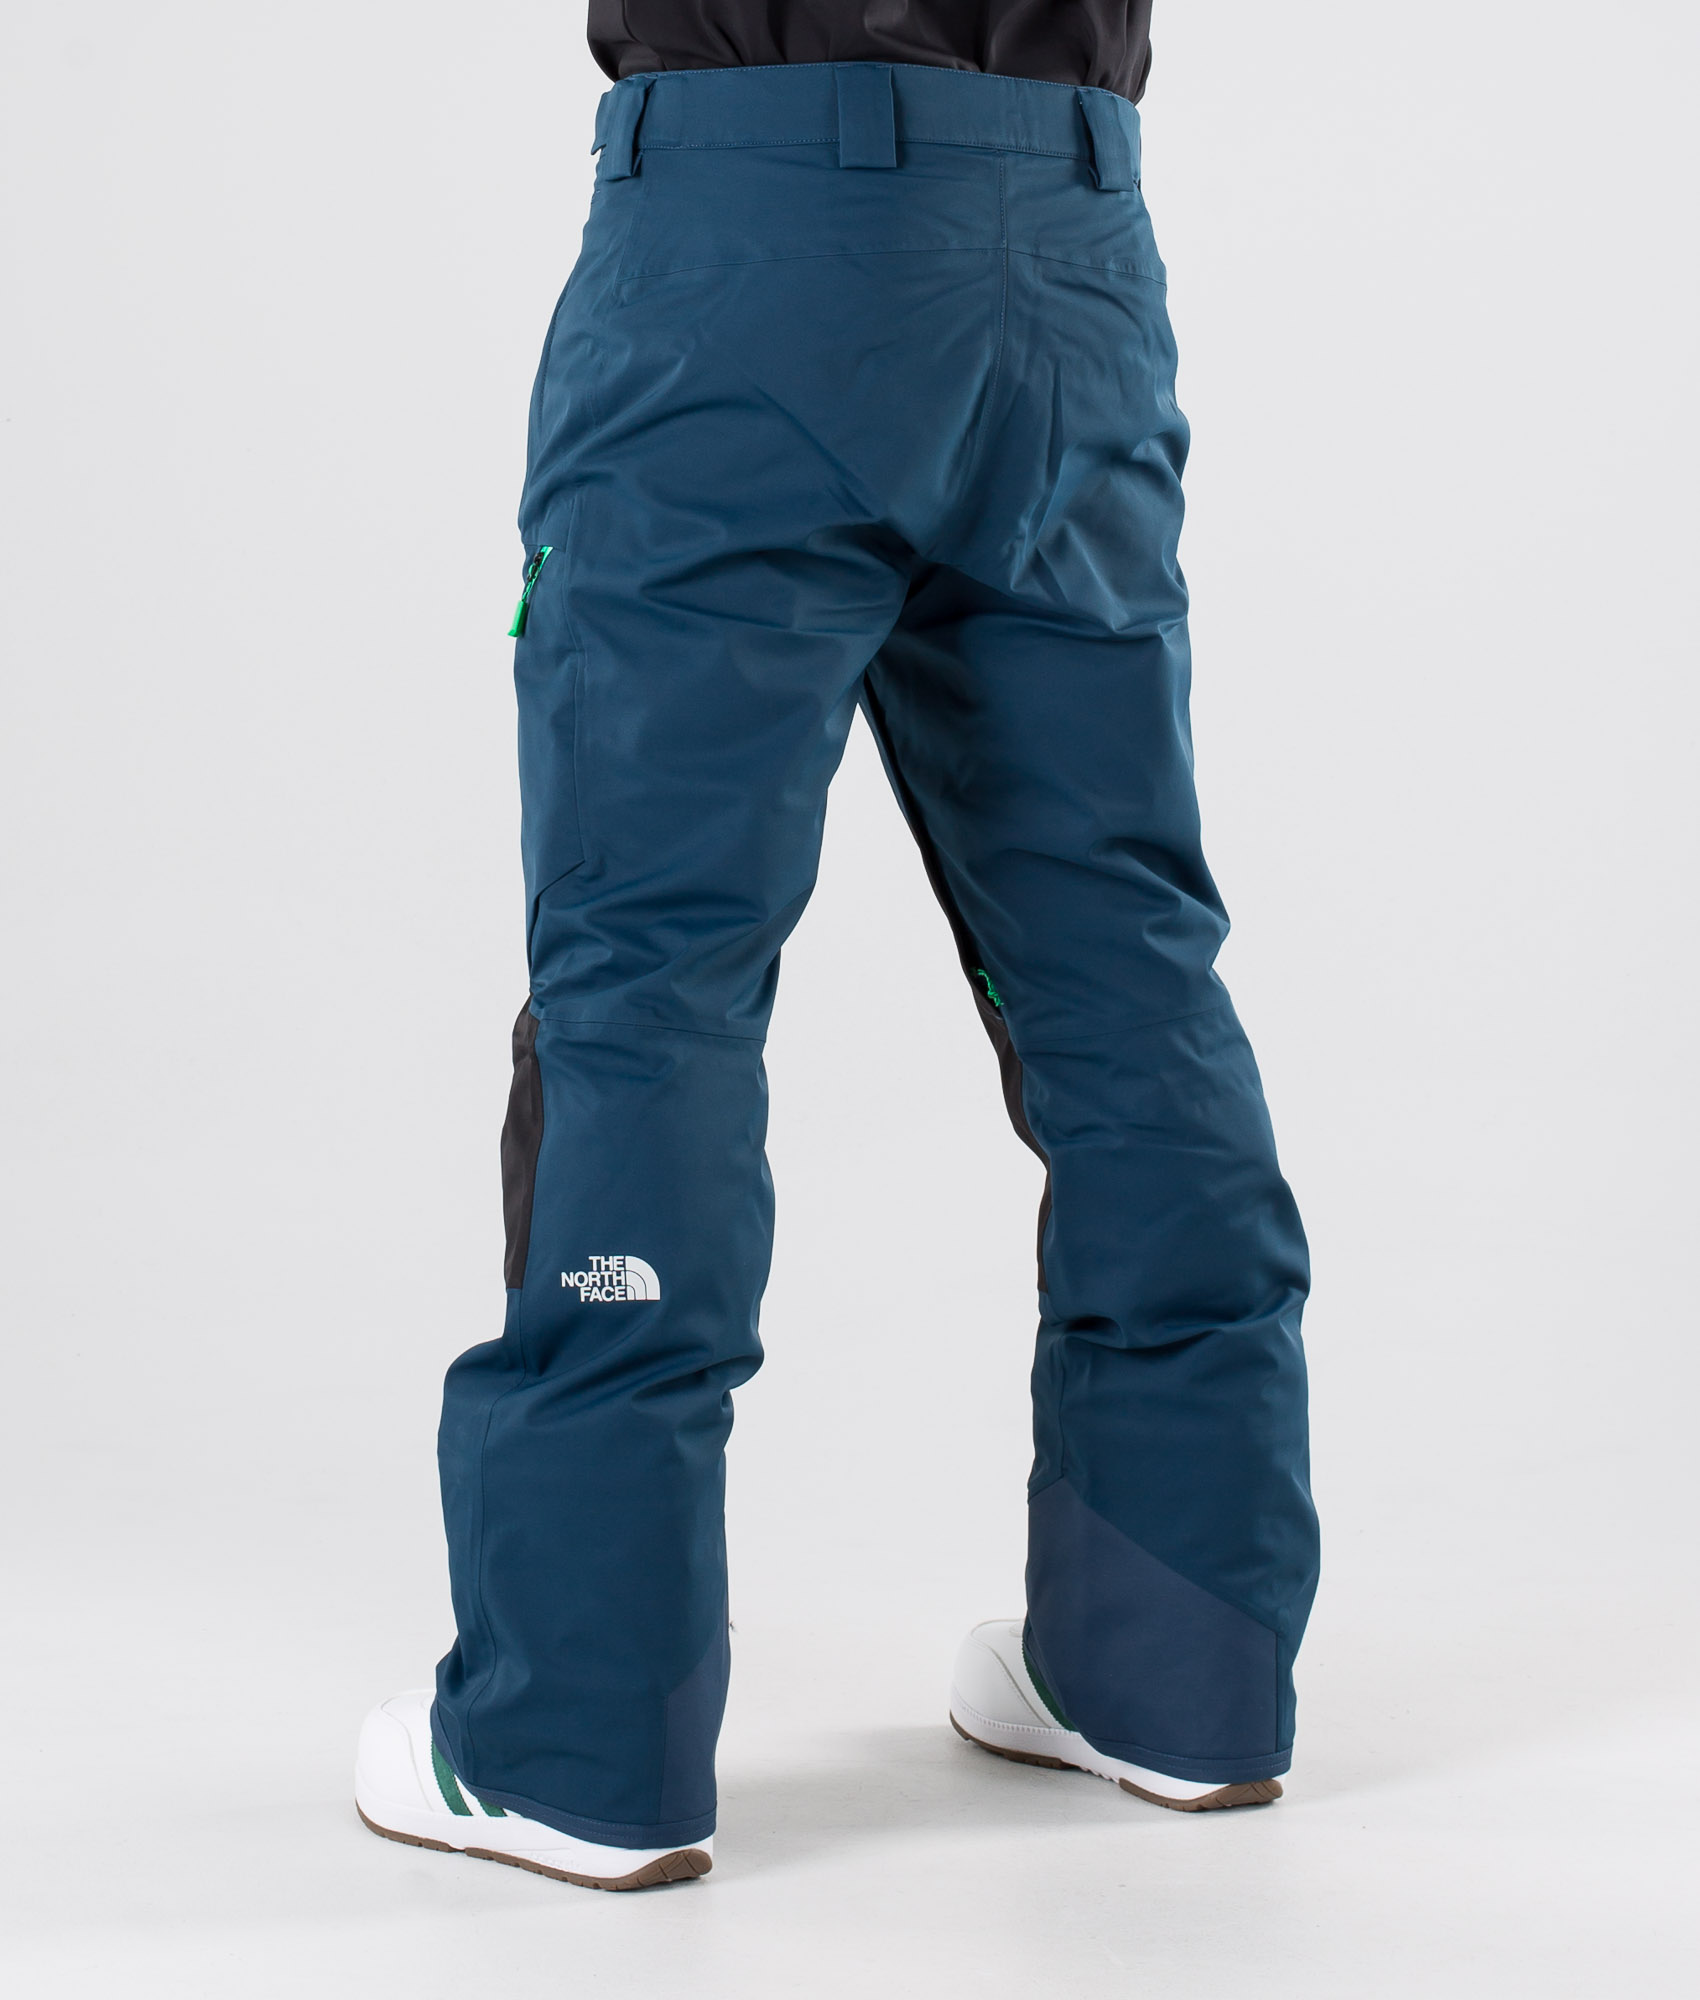 north face blue wing teal